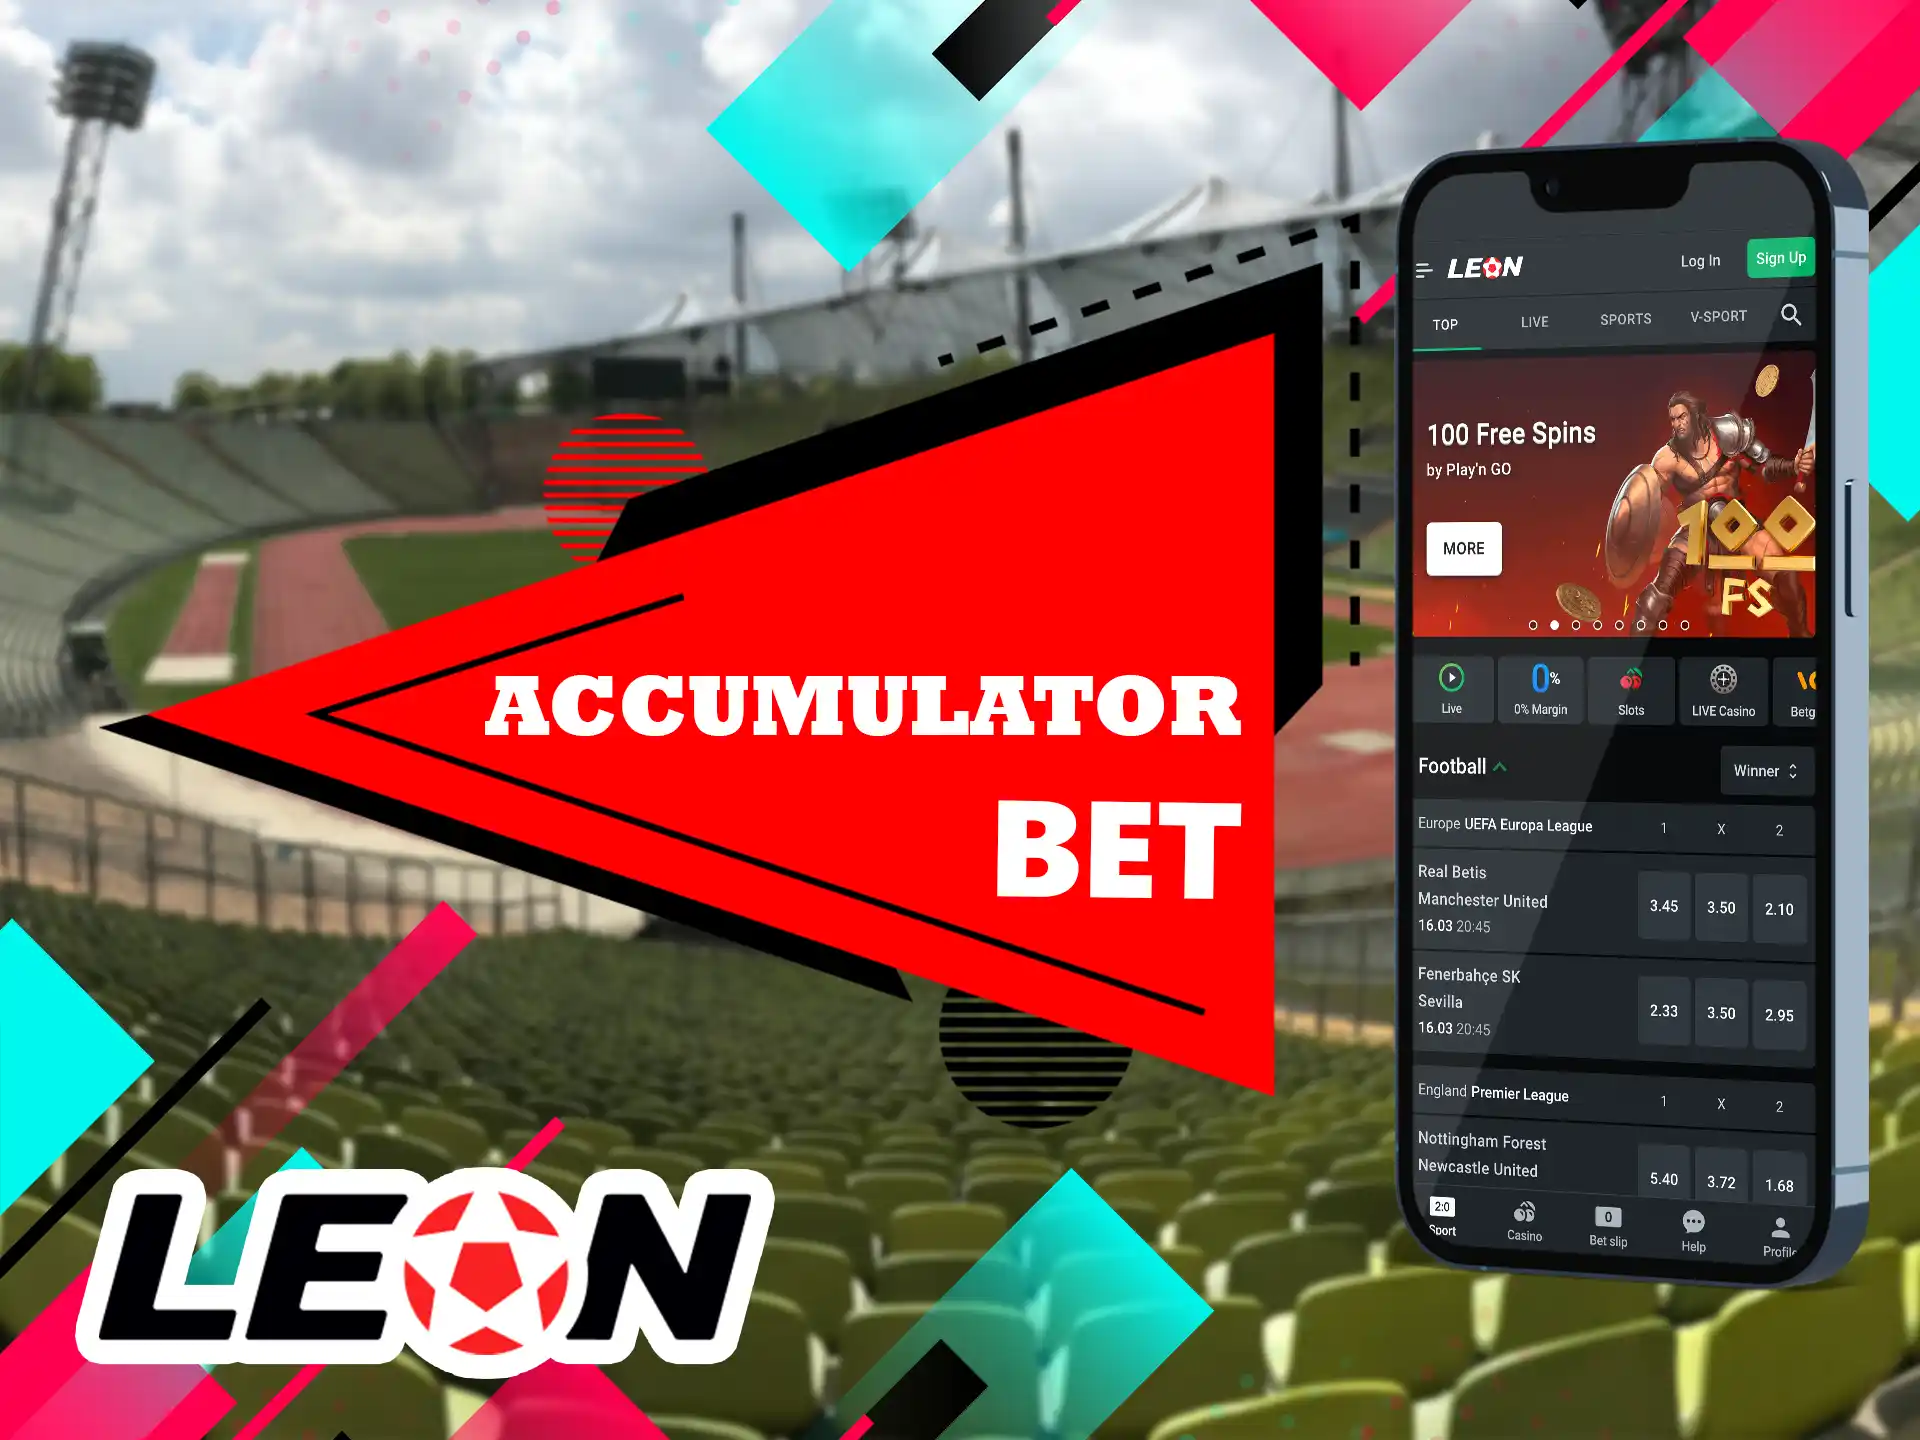 Here, Leon Bet app players can bet on several outcomes at once, the odds add up, and if one of the bets in the pool loses, the entire pool loses as well.